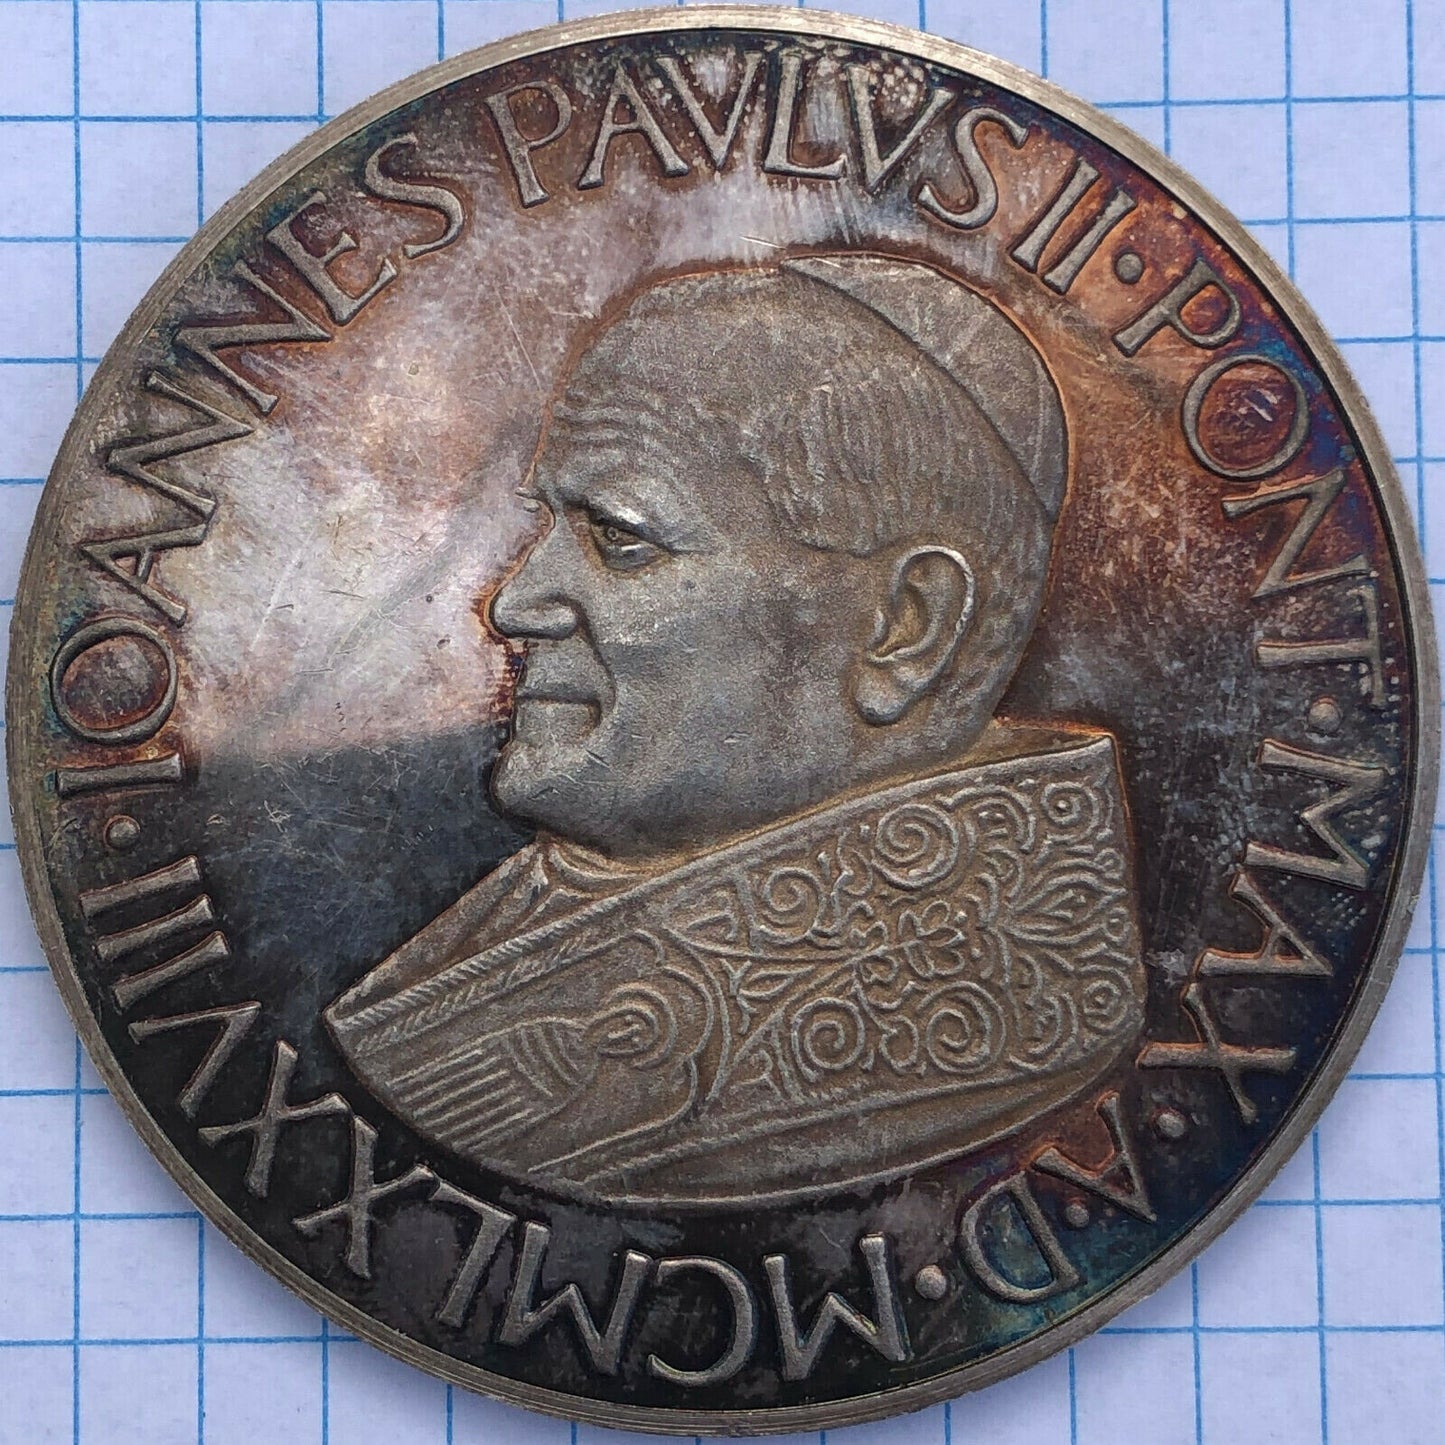 1978 ITALY Investiture of John Paul II as Pope 57mm silver medal EF